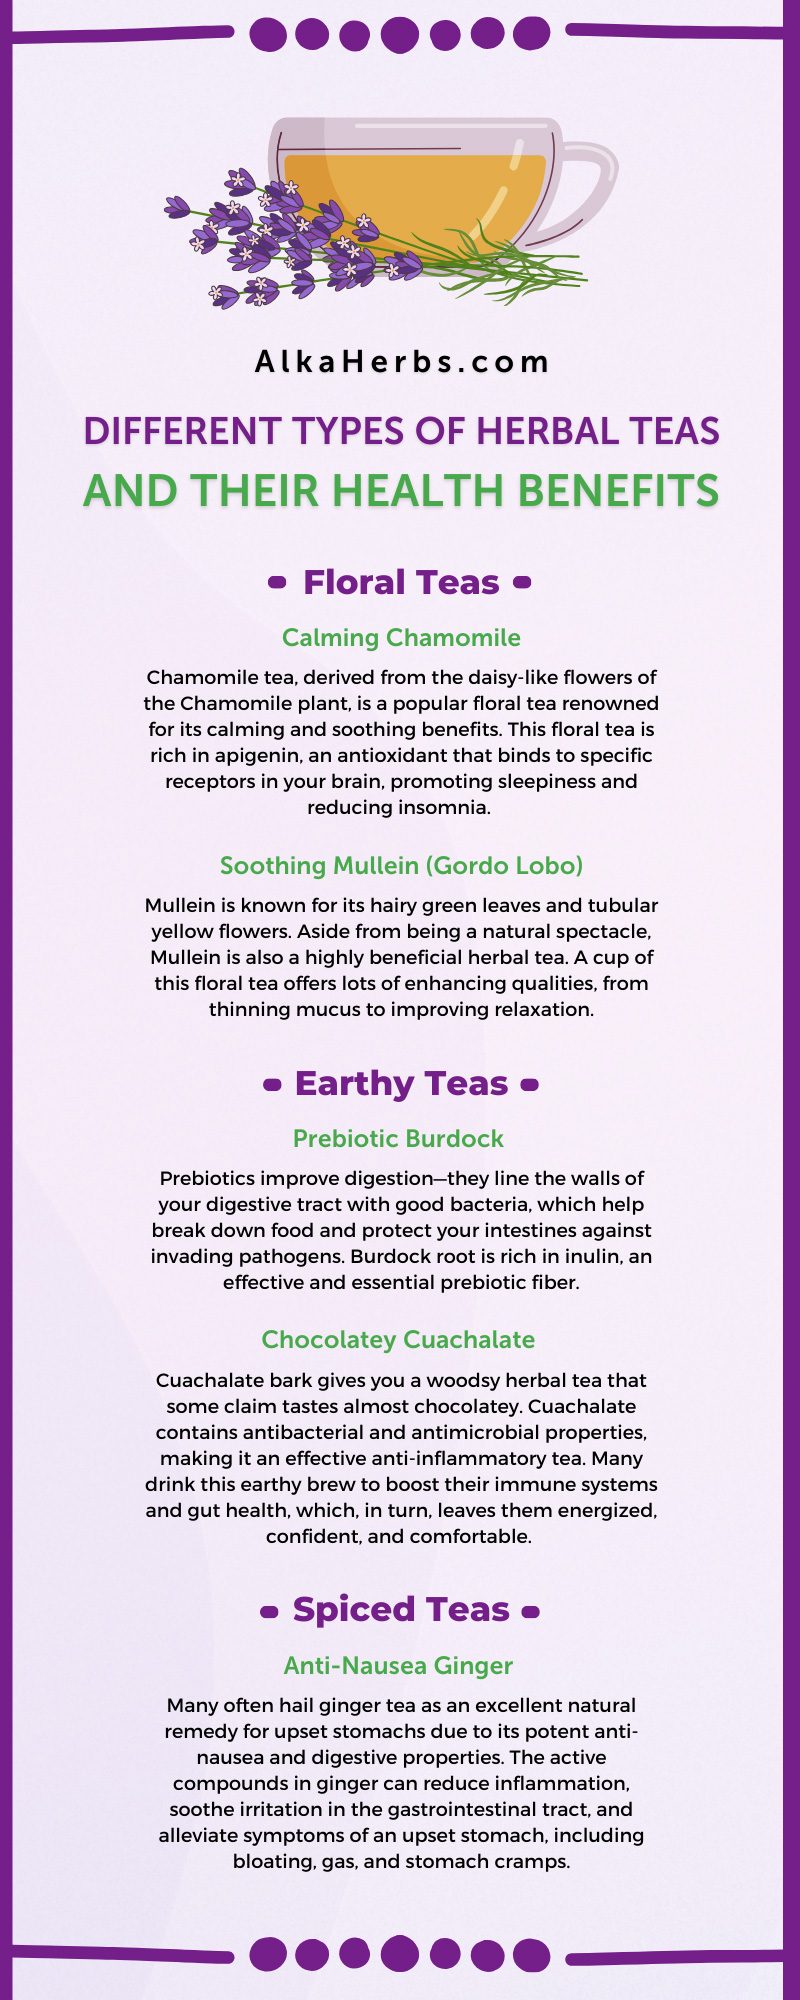 Different Types of Herbal Teas and Their Health Benefits